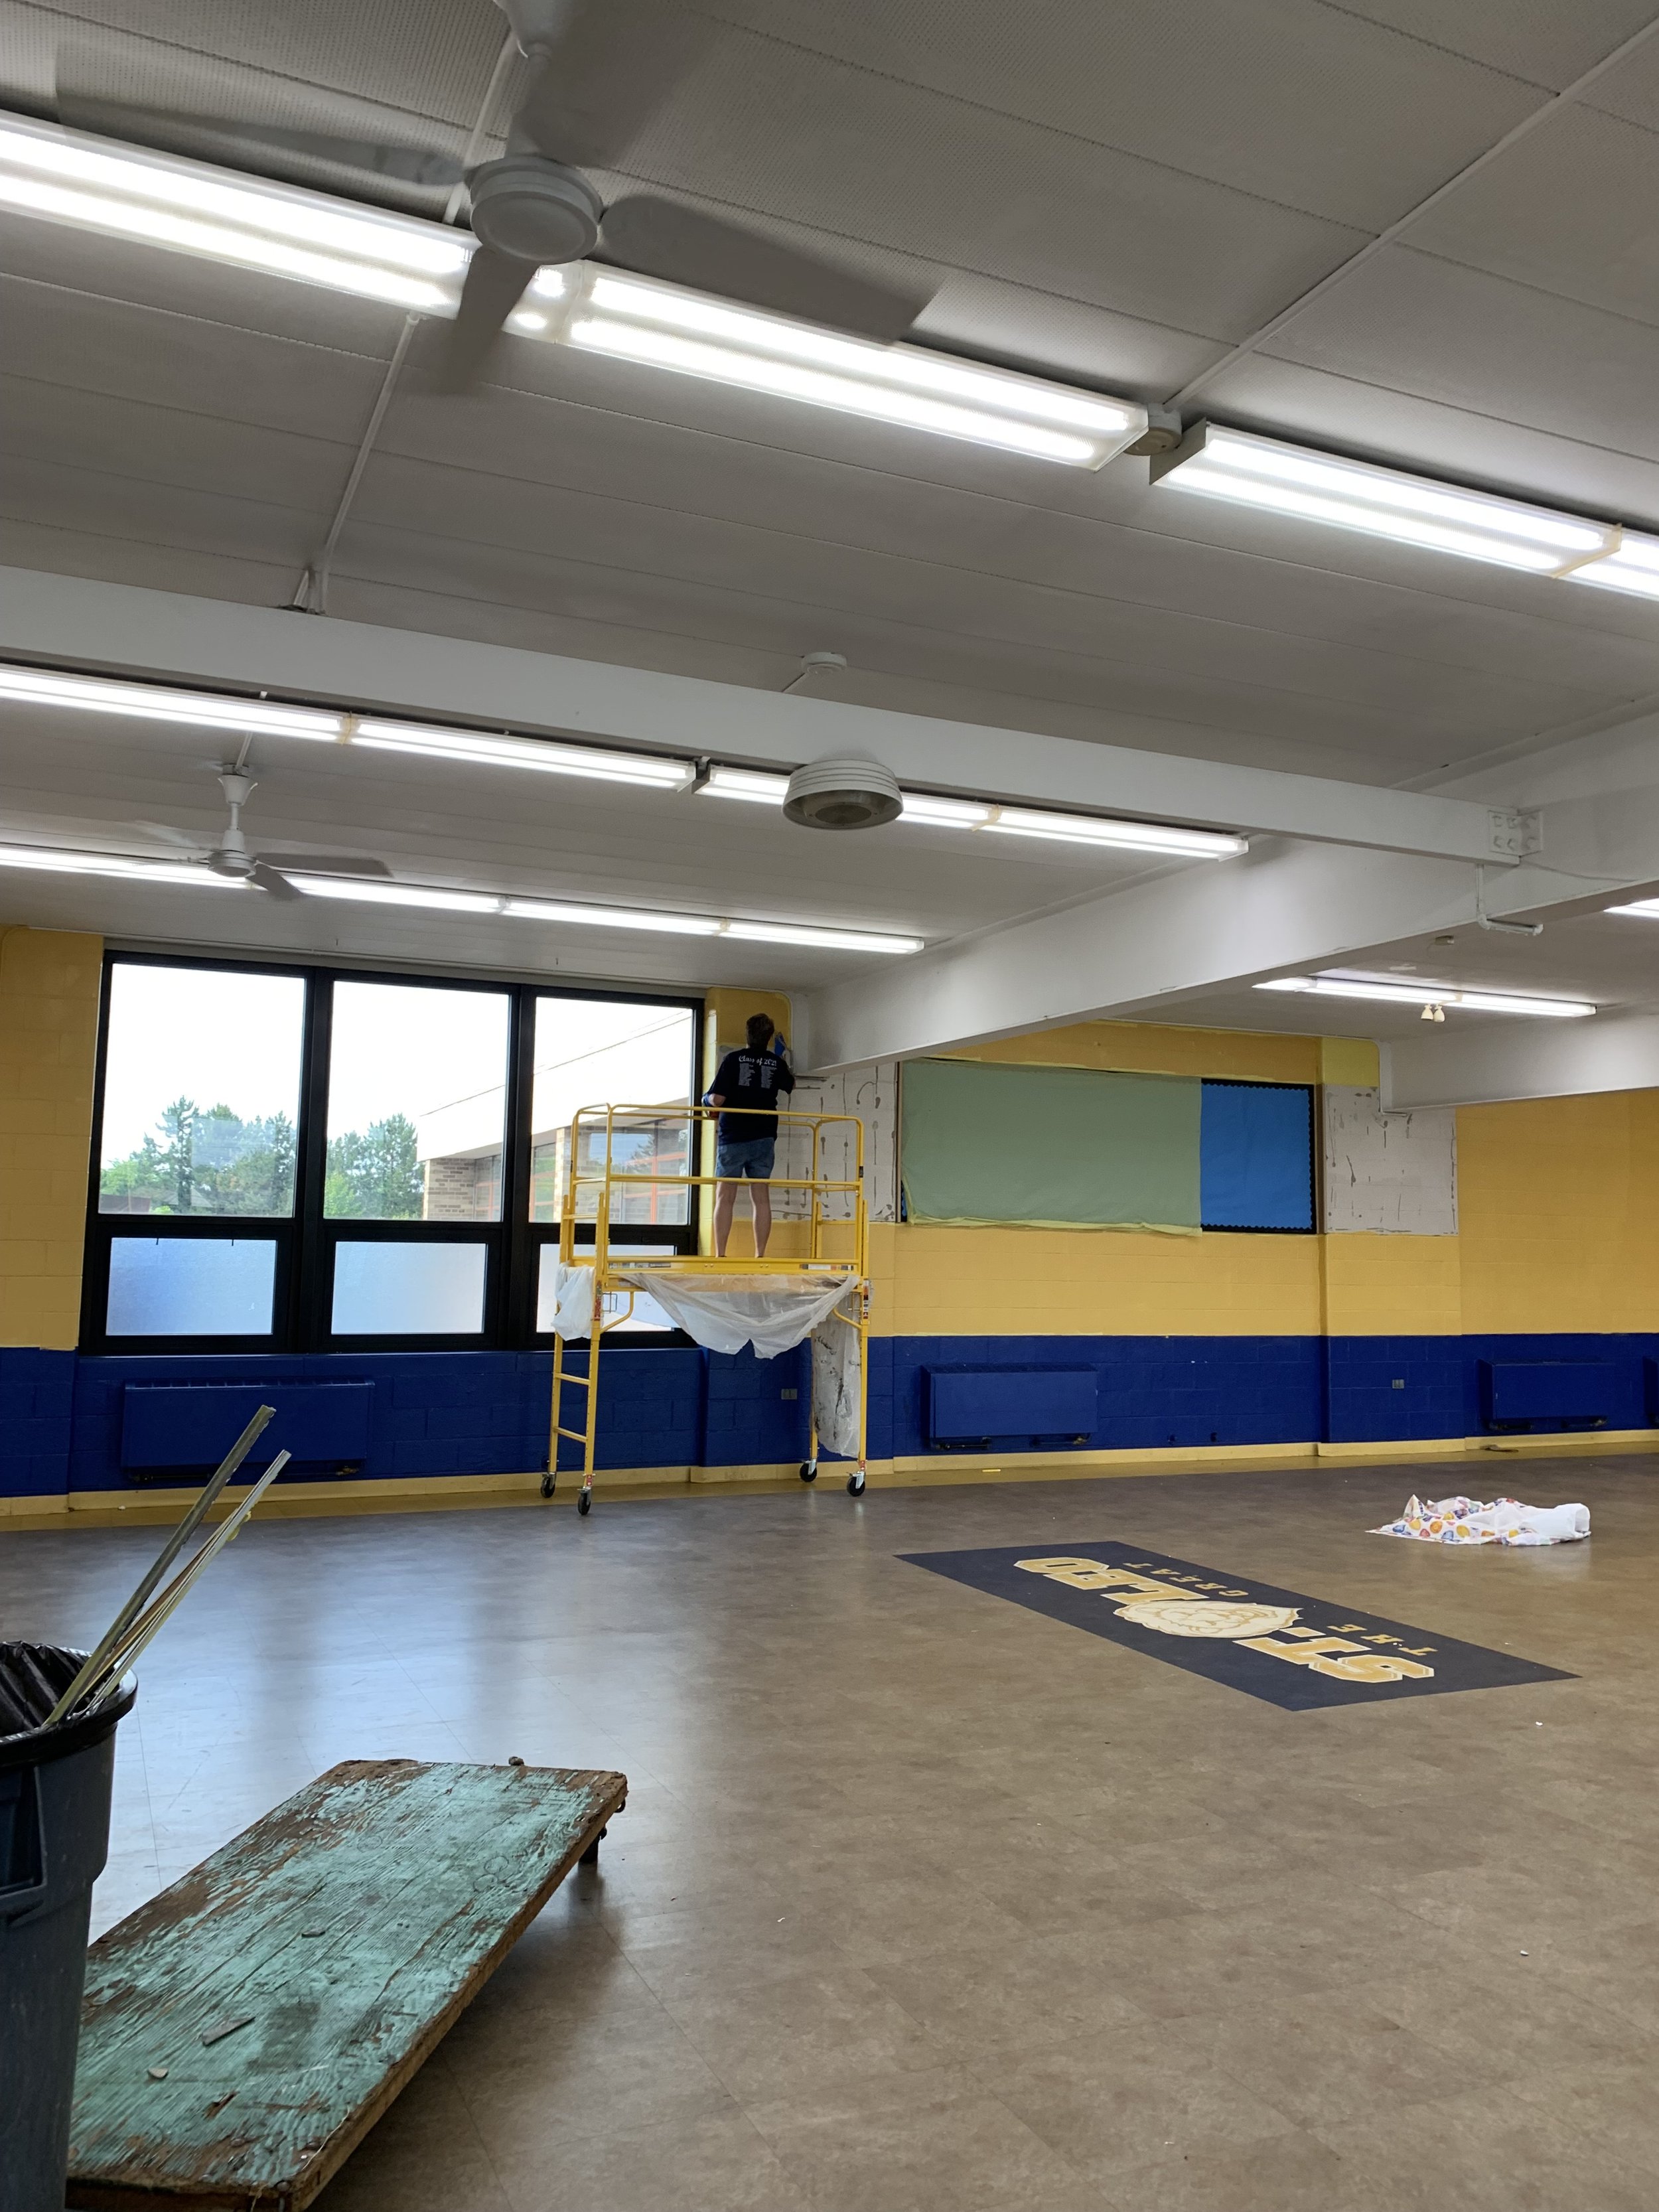 The cafeteria is goin' for the gold with a fresh new coat  of paint!of paint!!